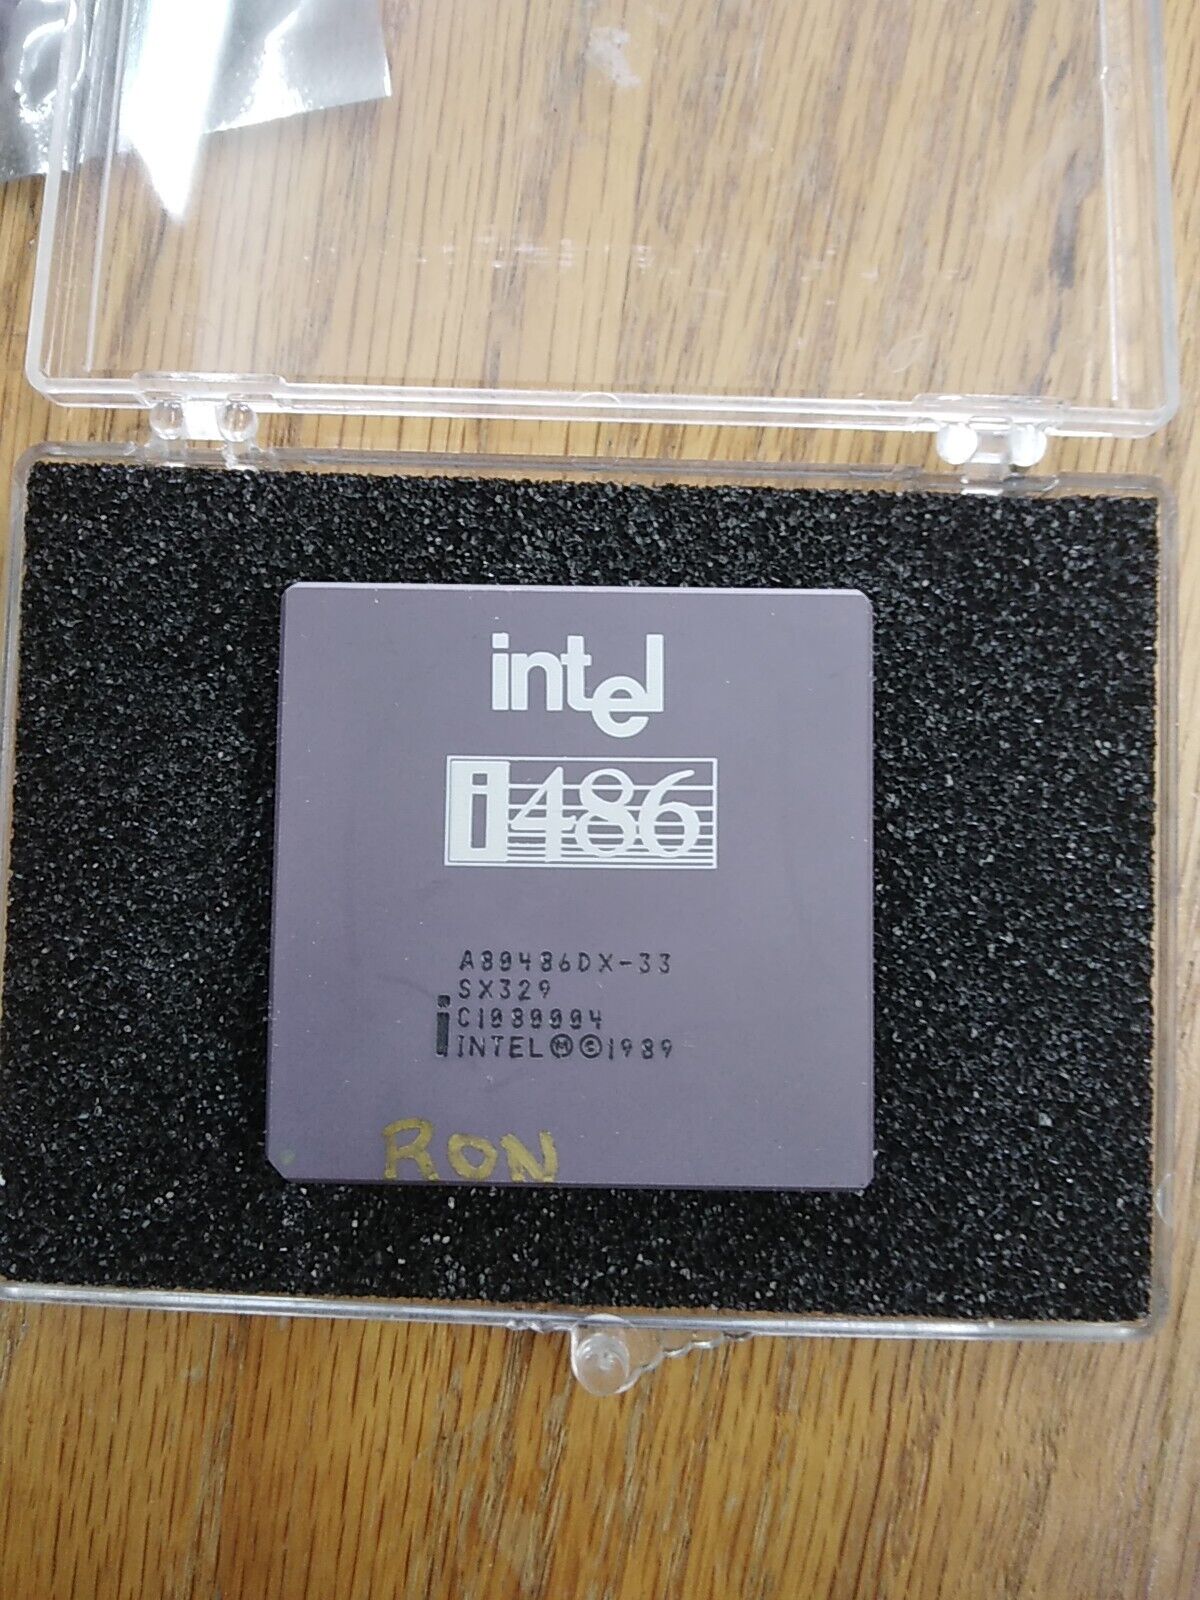 Vintage Intel i486 DX A80486DX-33 33MHz CPU Processor SOLD AS IS